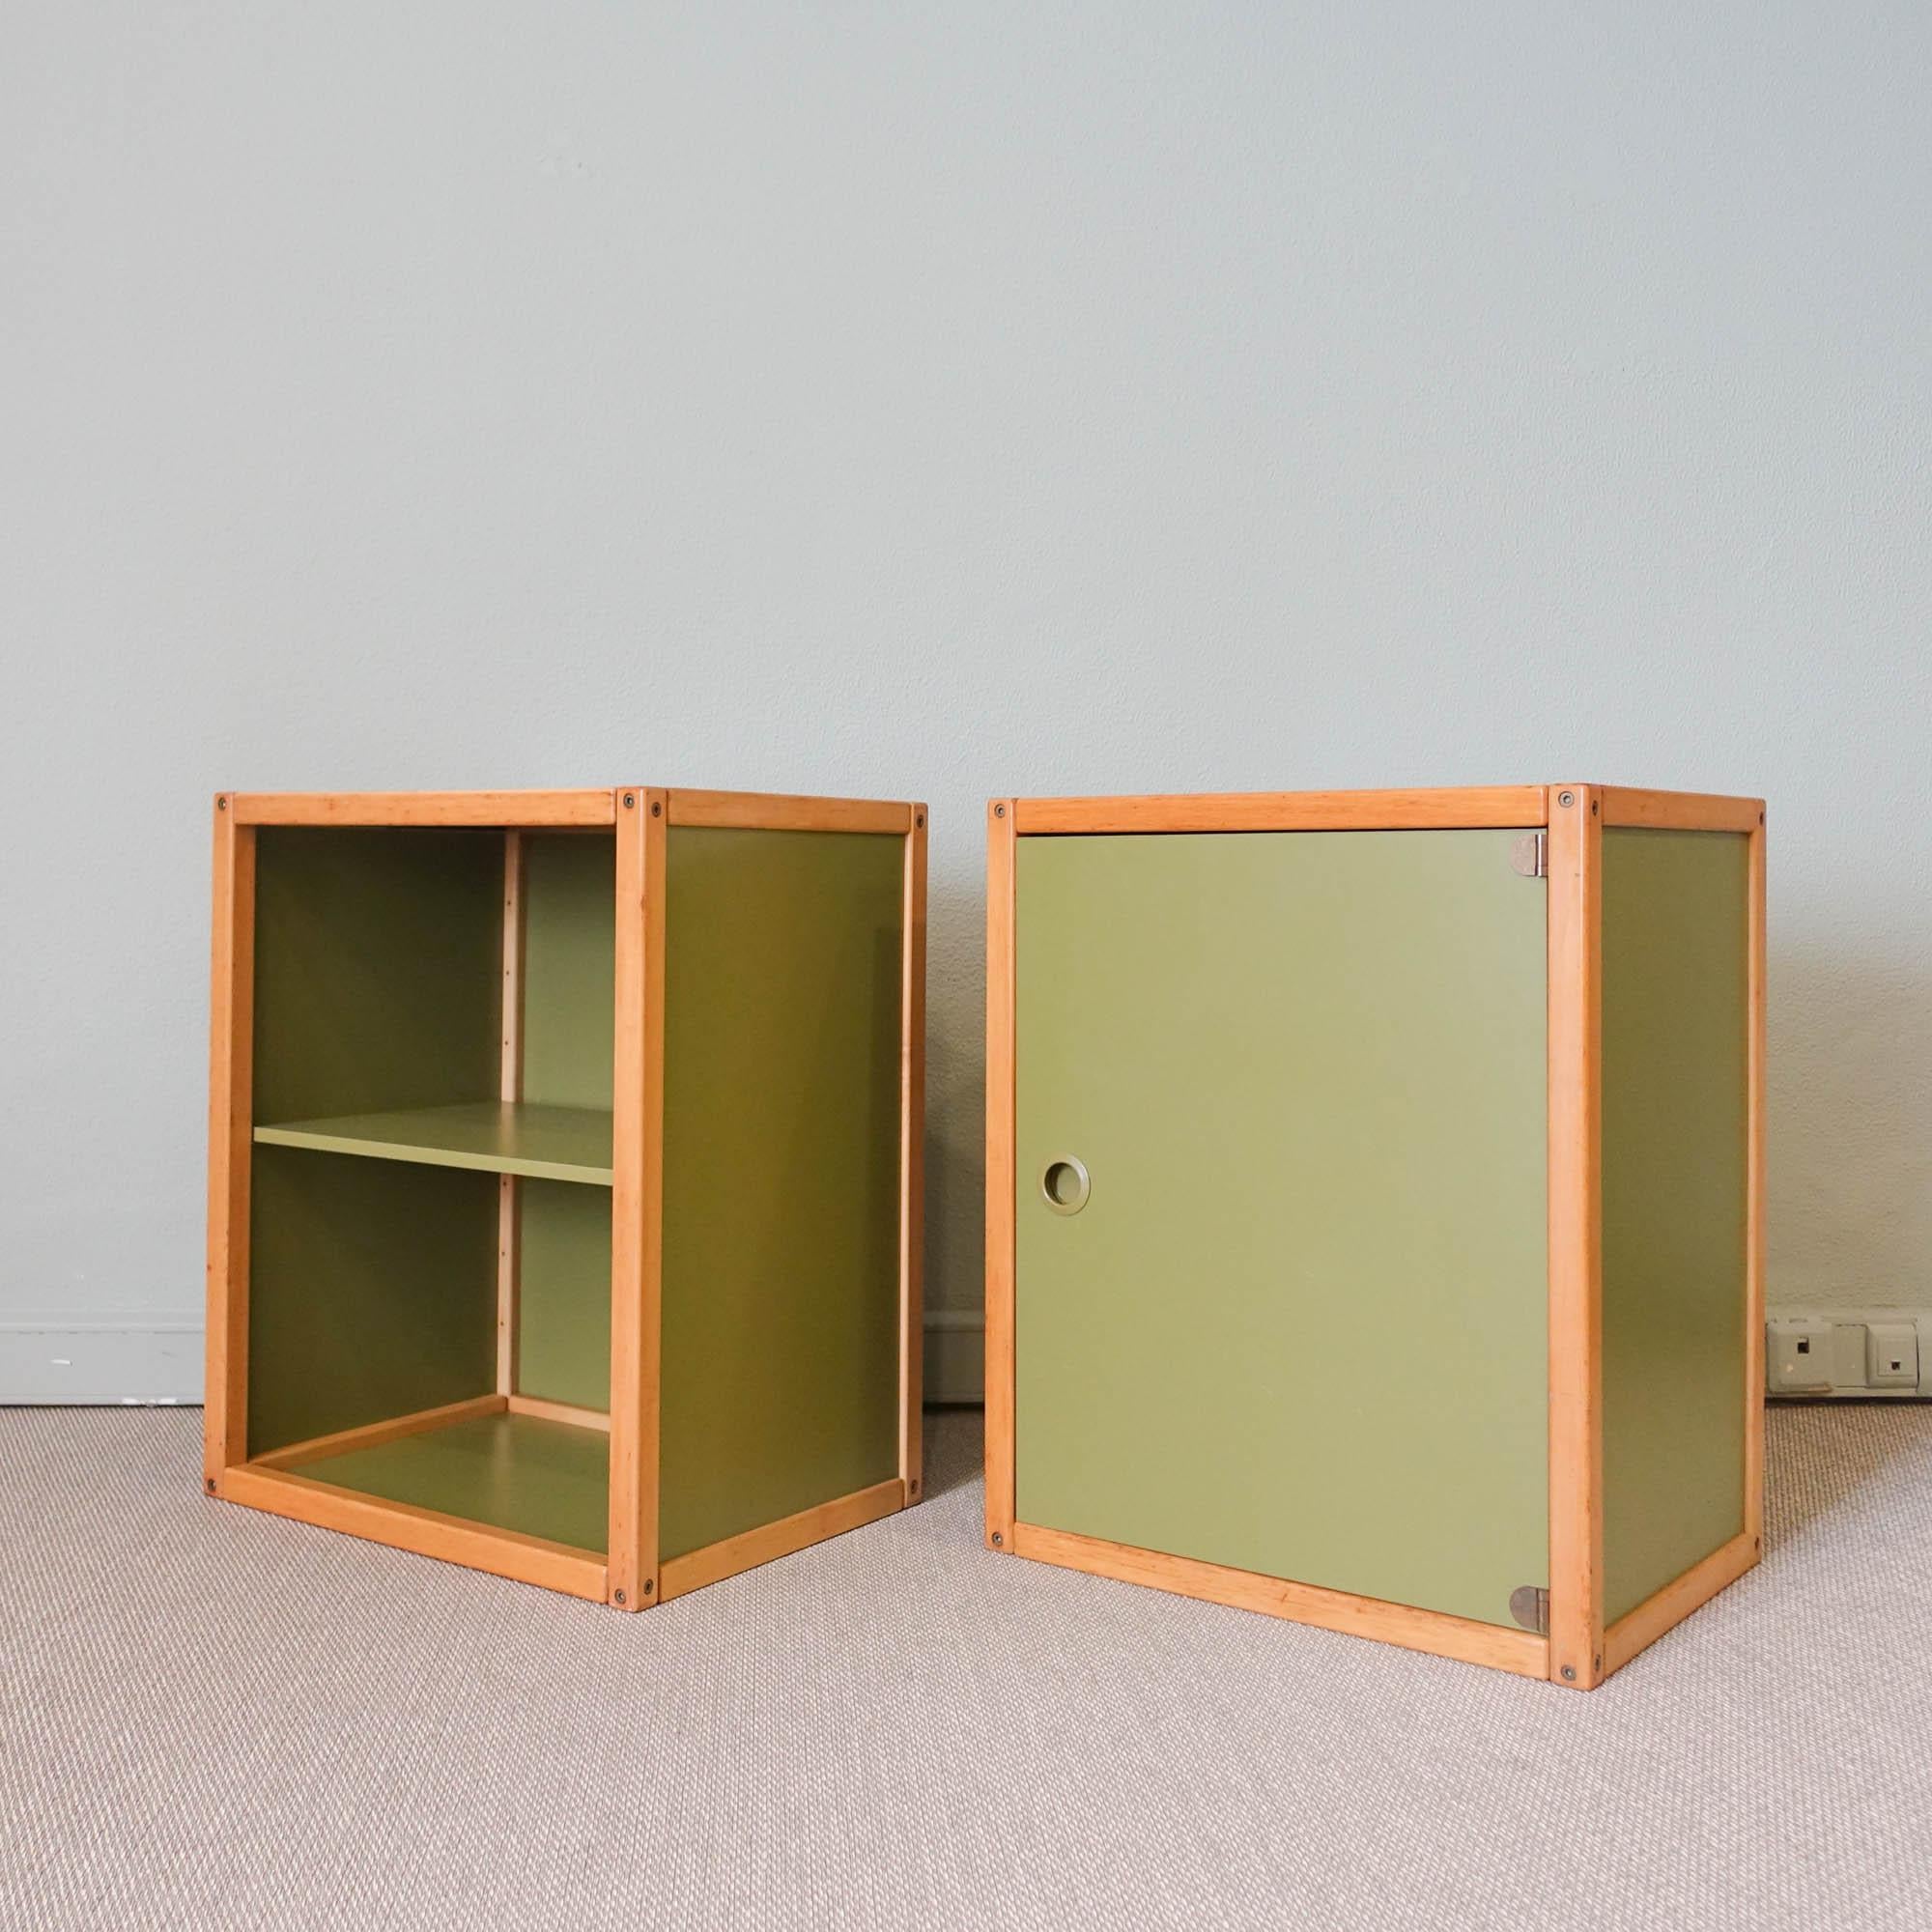 Pair of Vintage Profilsystem Collection Storage Units by Elmar Flötotto In Good Condition For Sale In Lisboa, PT